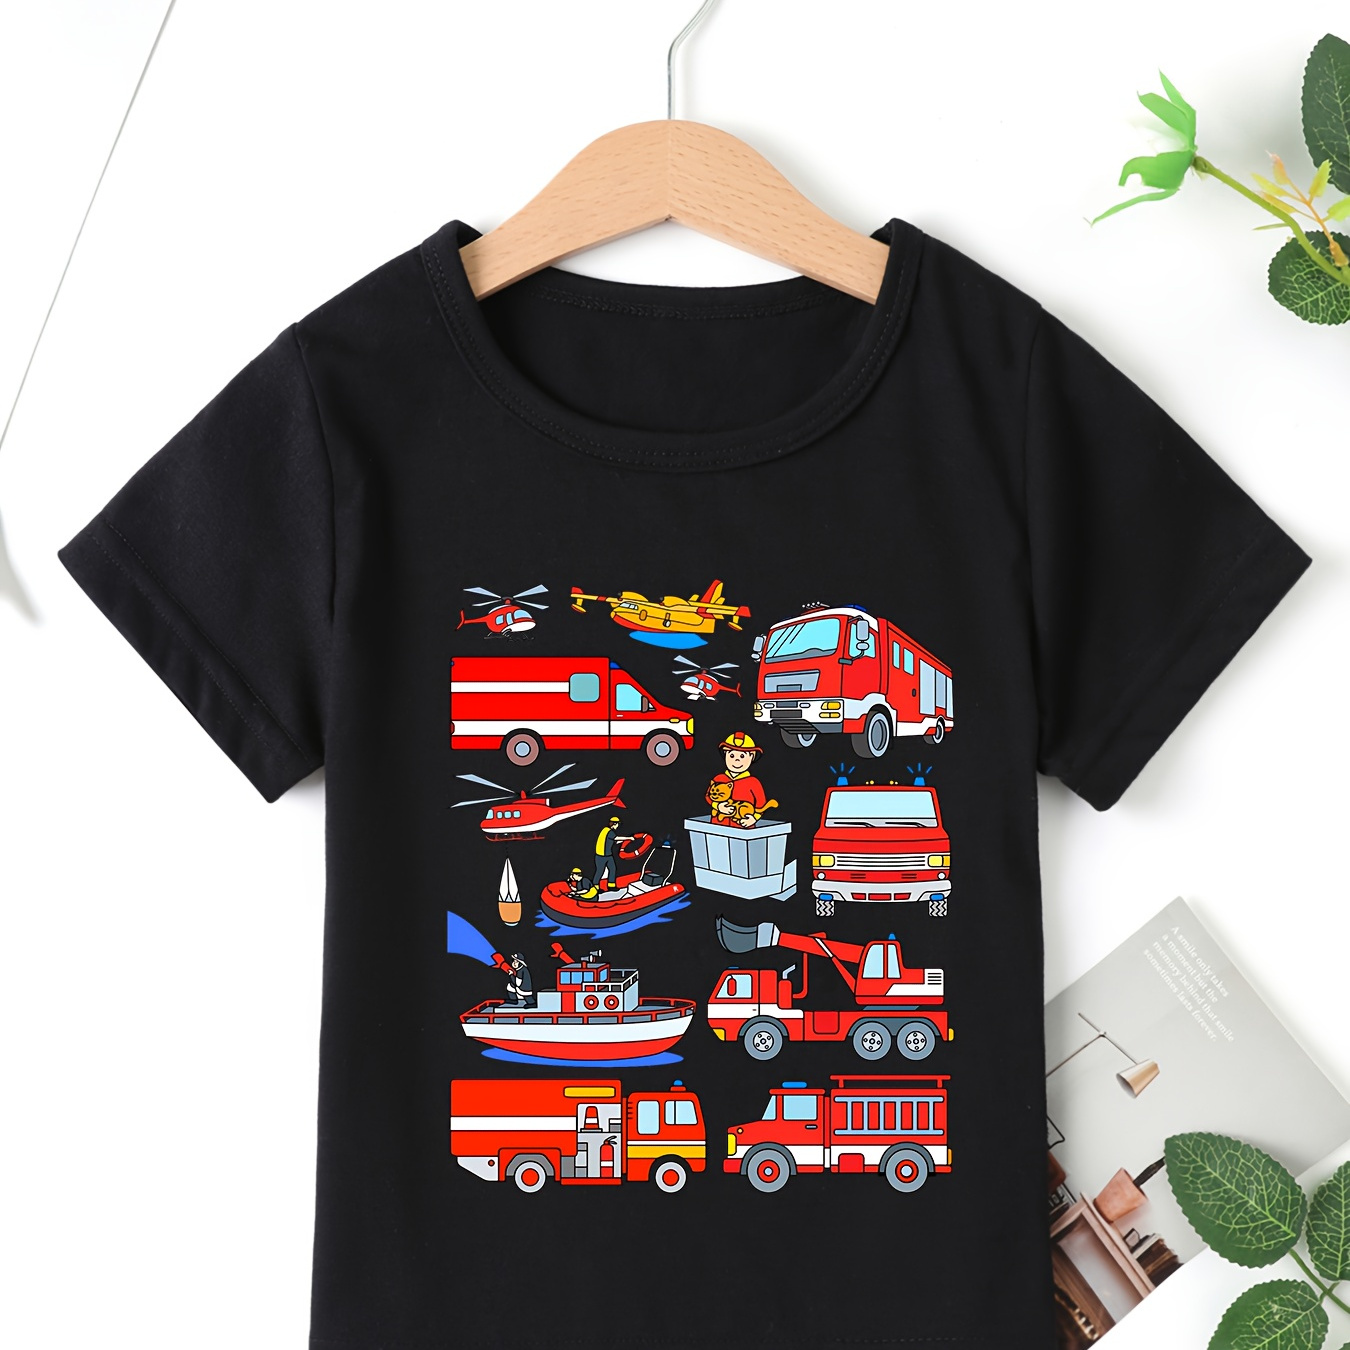 

Casual Trendy Boys' Summer Top - Fire Engine Graphic Short Sleeve V Neck T-shirt - Street Outing Tee Tops Gift